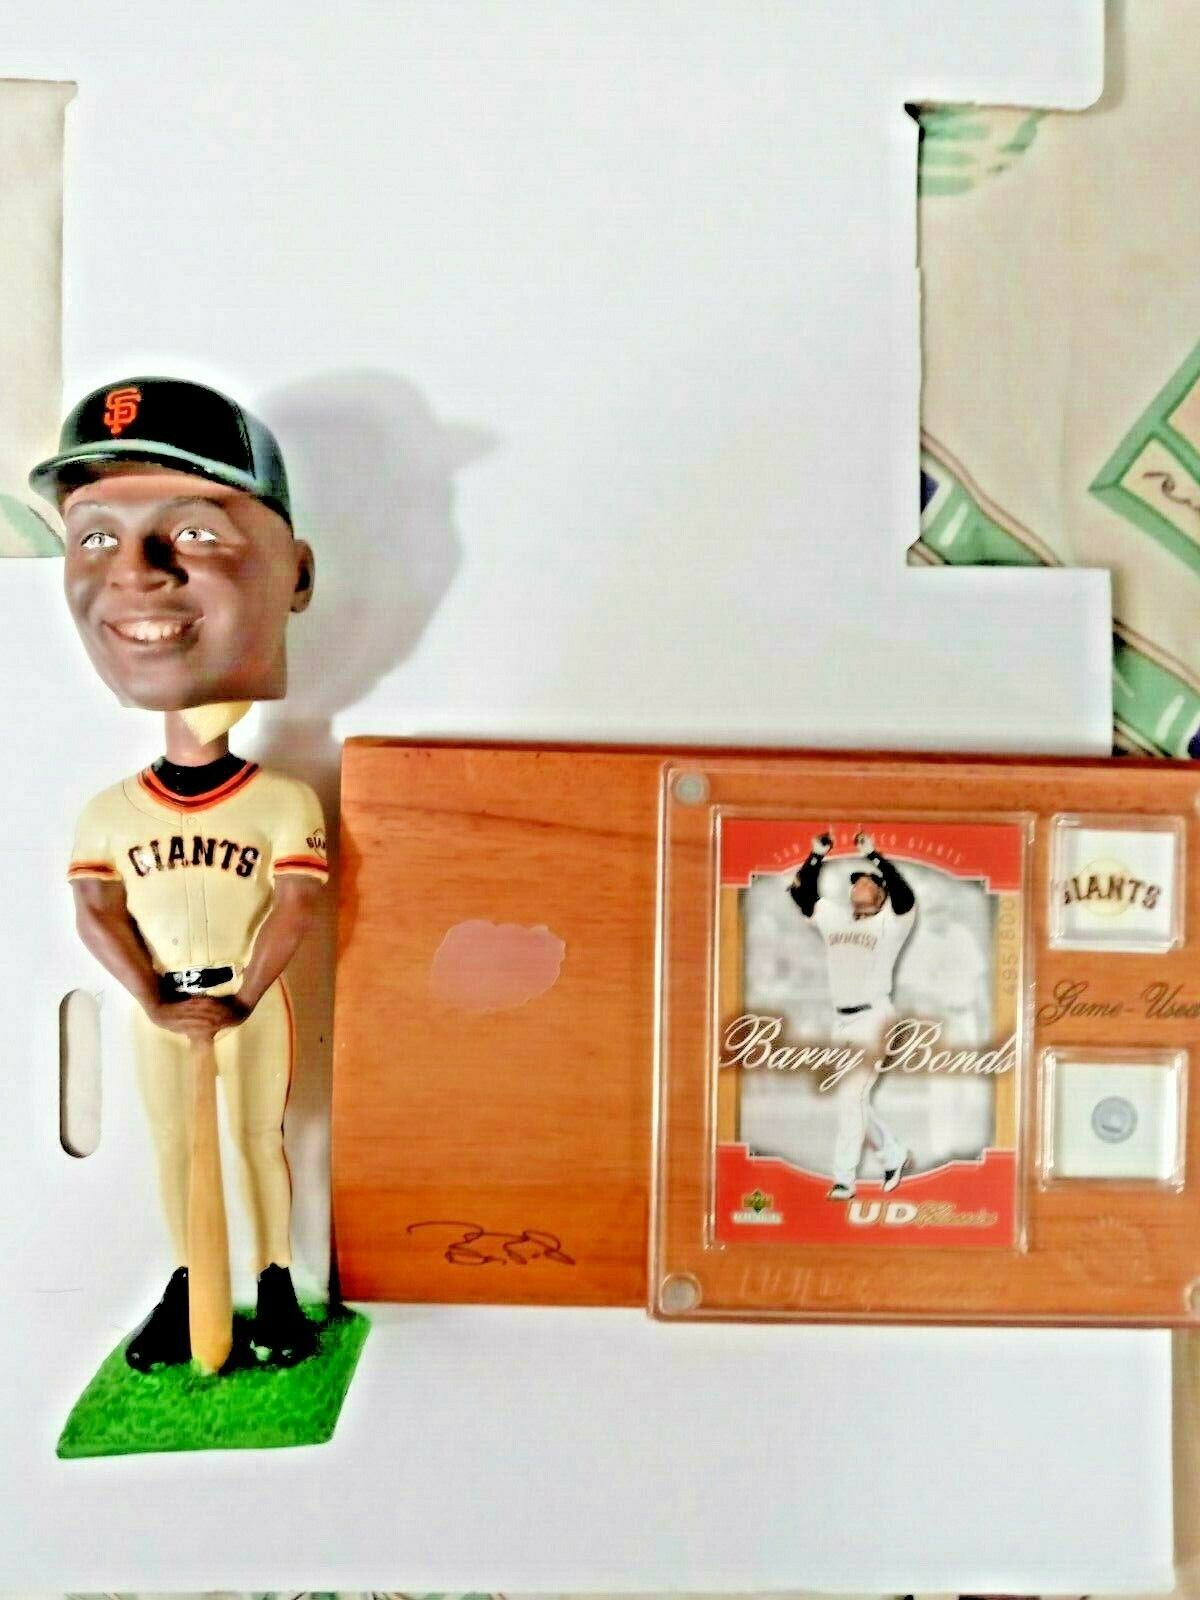 Rare Barry Bonds bobblehead with base- Game used base piece- Limited to 800 